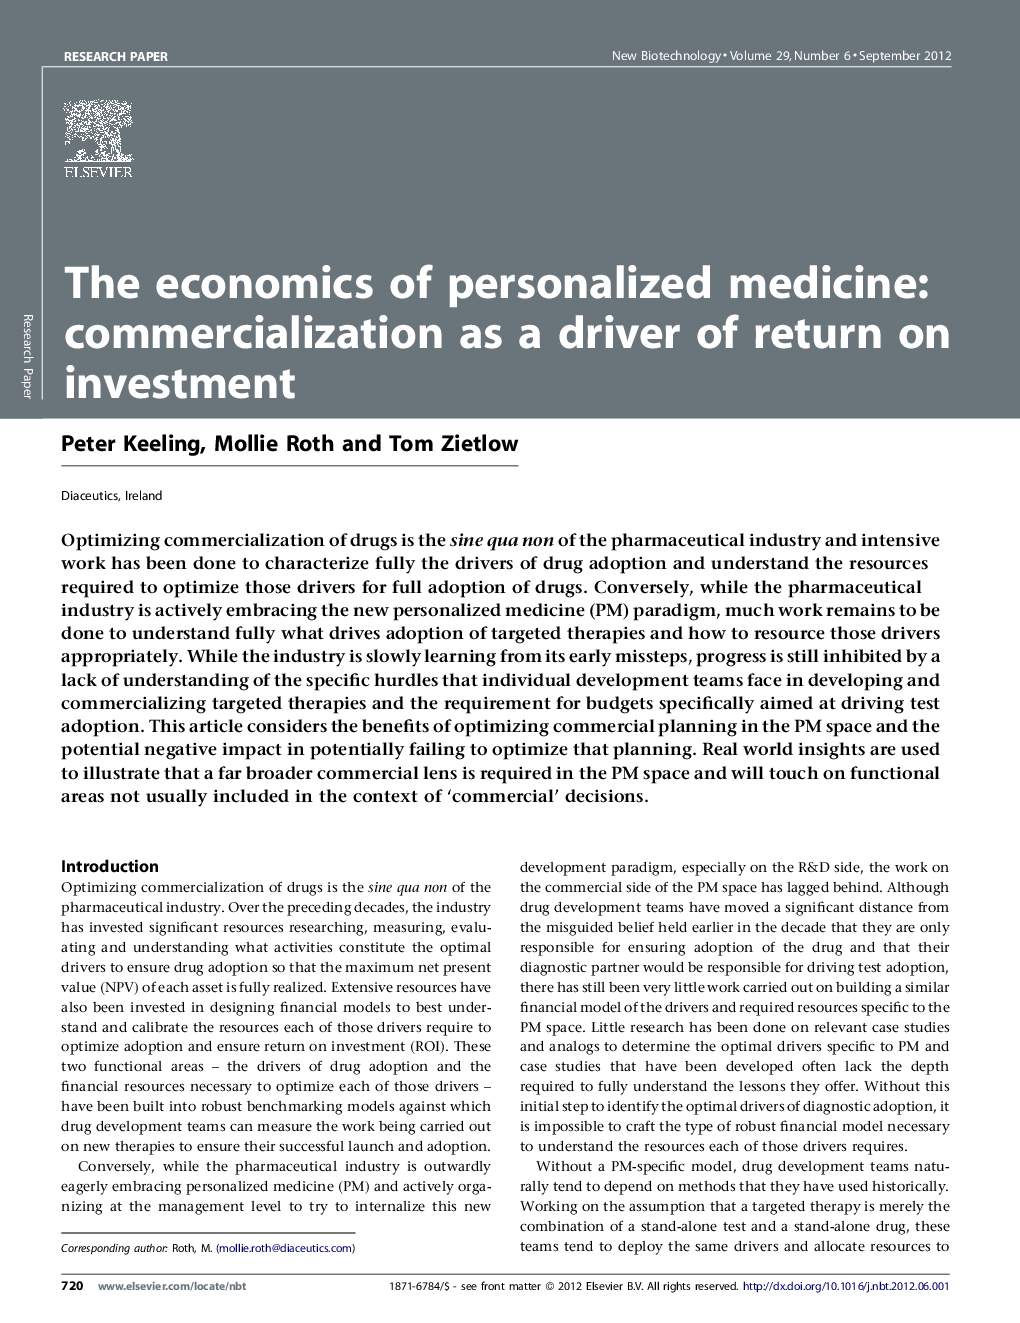 The economics of personalized medicine: commercialization as a driver of return on investment